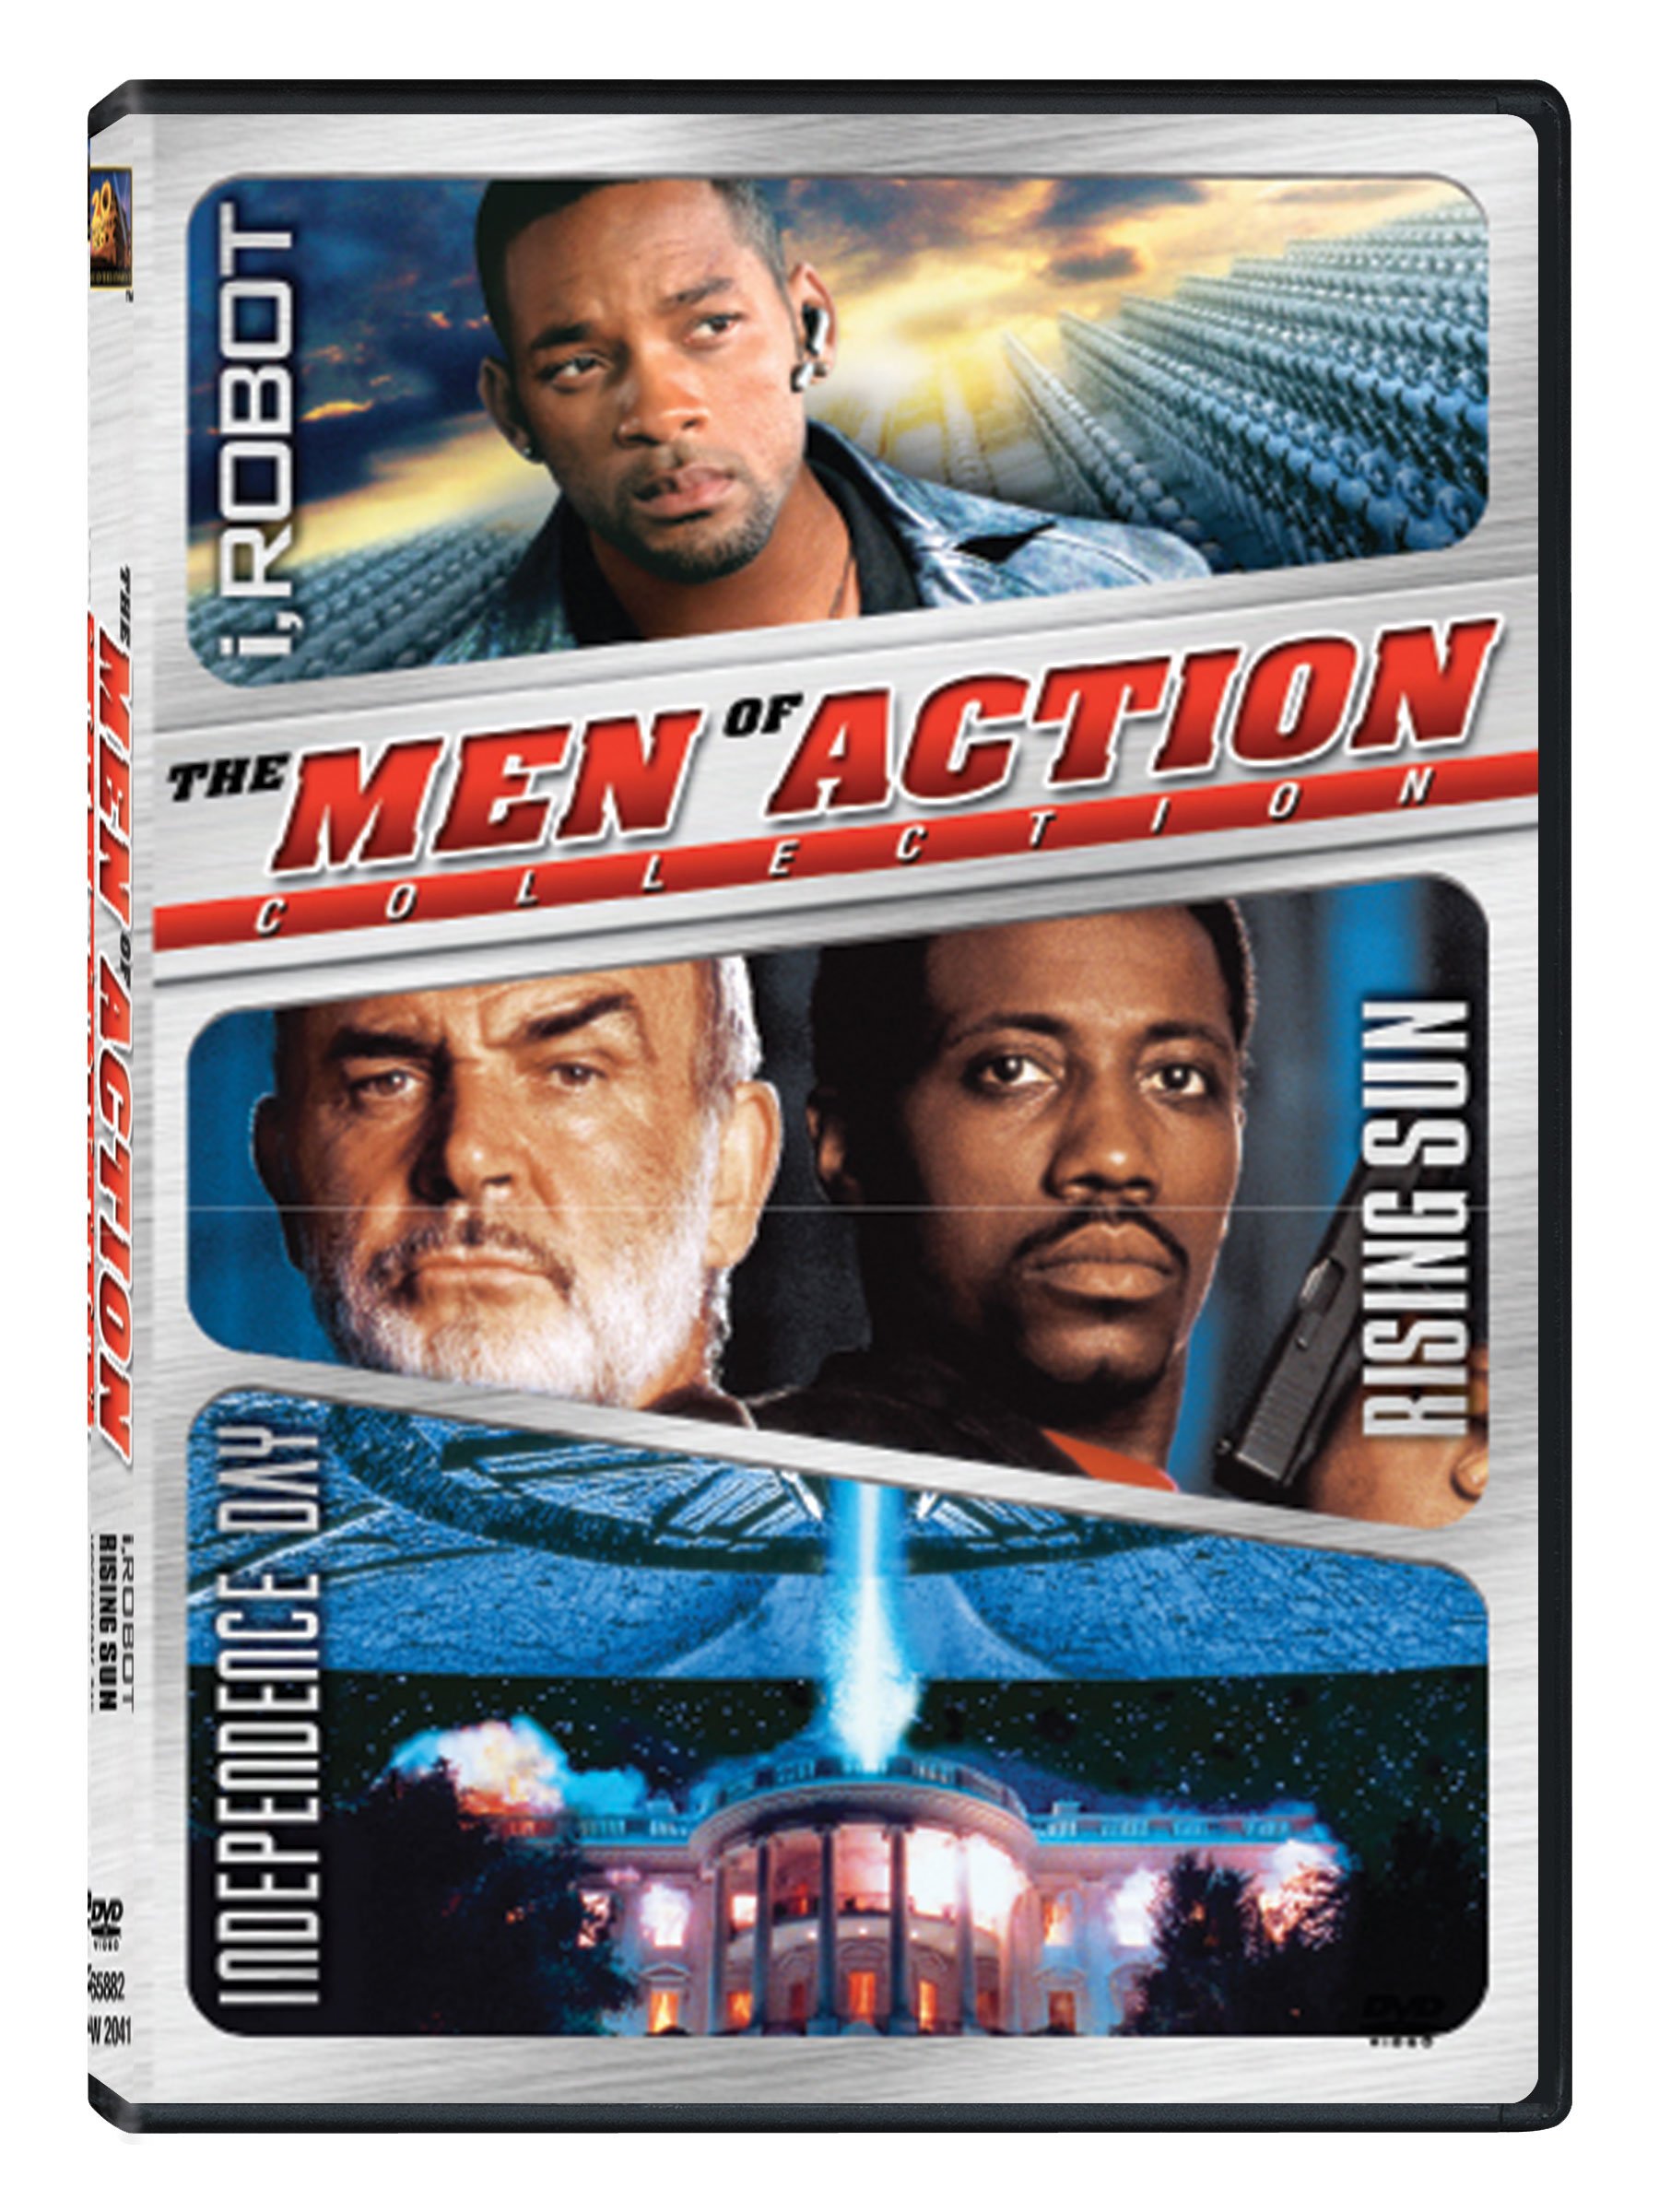 the-men-of-action-collection-3-movies-i-robot-rising-sun-independence-day-3-disc-box-set